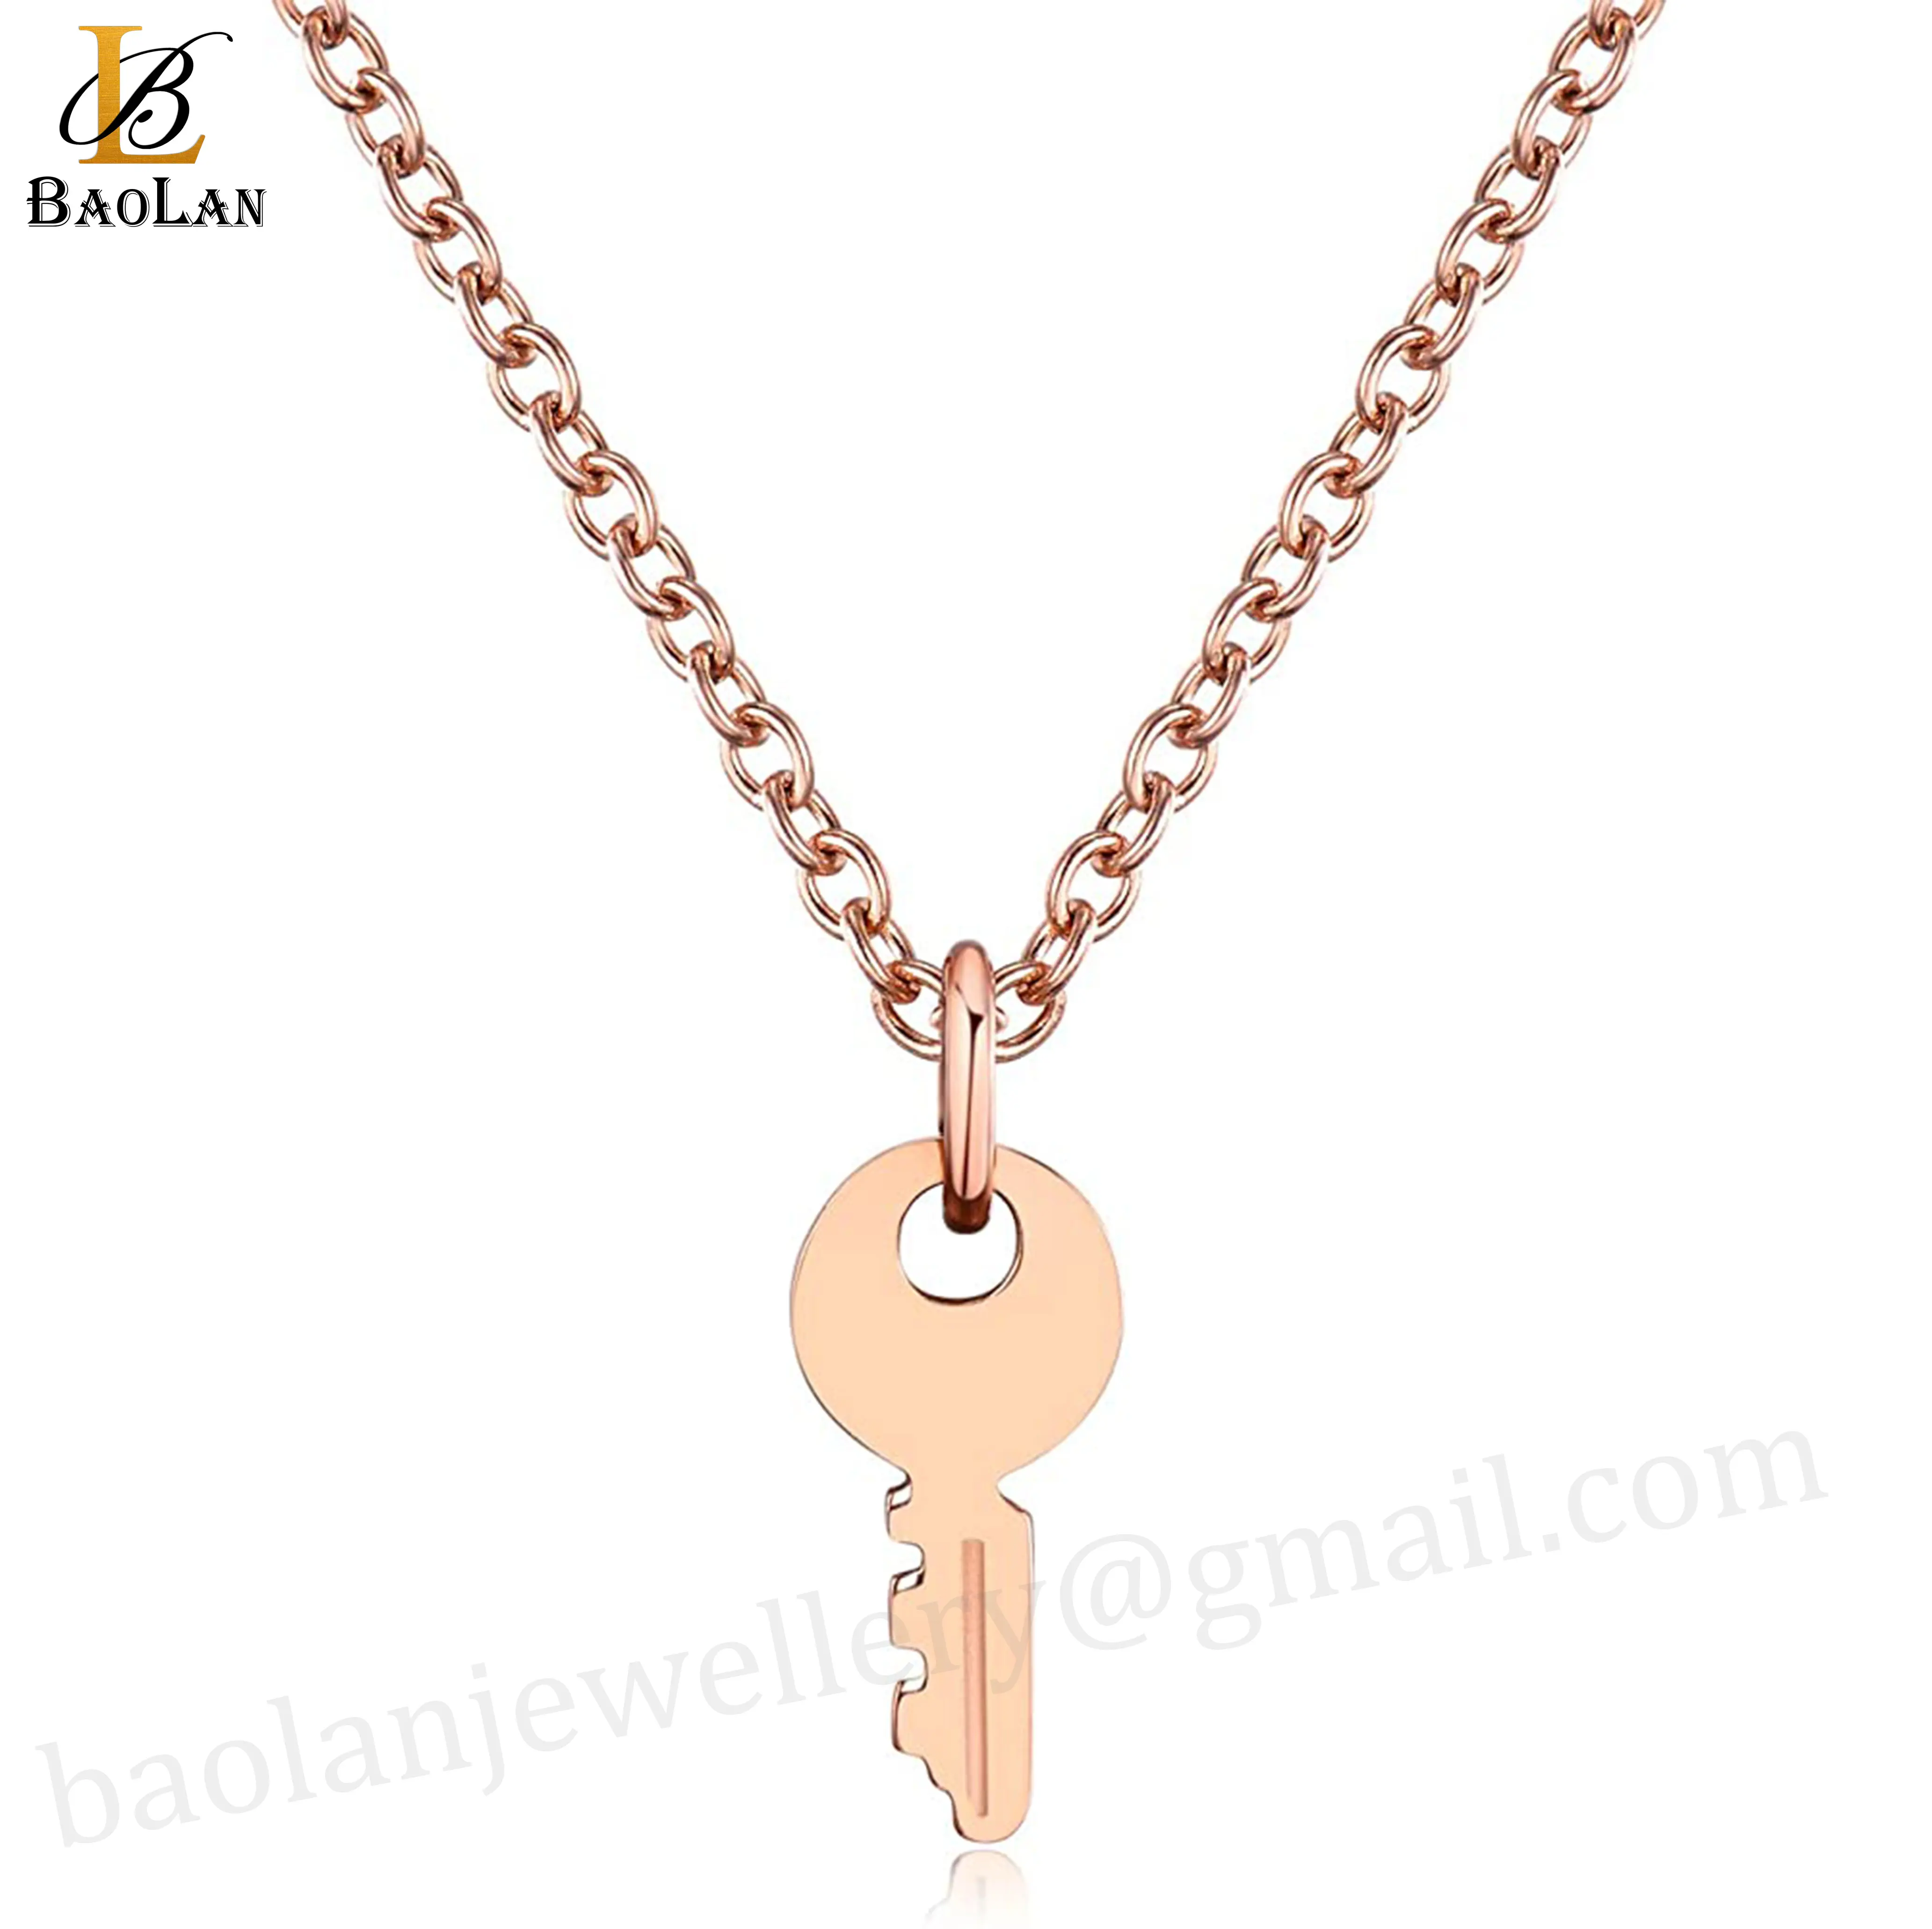 High Quality Small Key Pendant Necklace Unique Personality Jewelry Gift - Stainless Steel BAOLAN JEWELRY